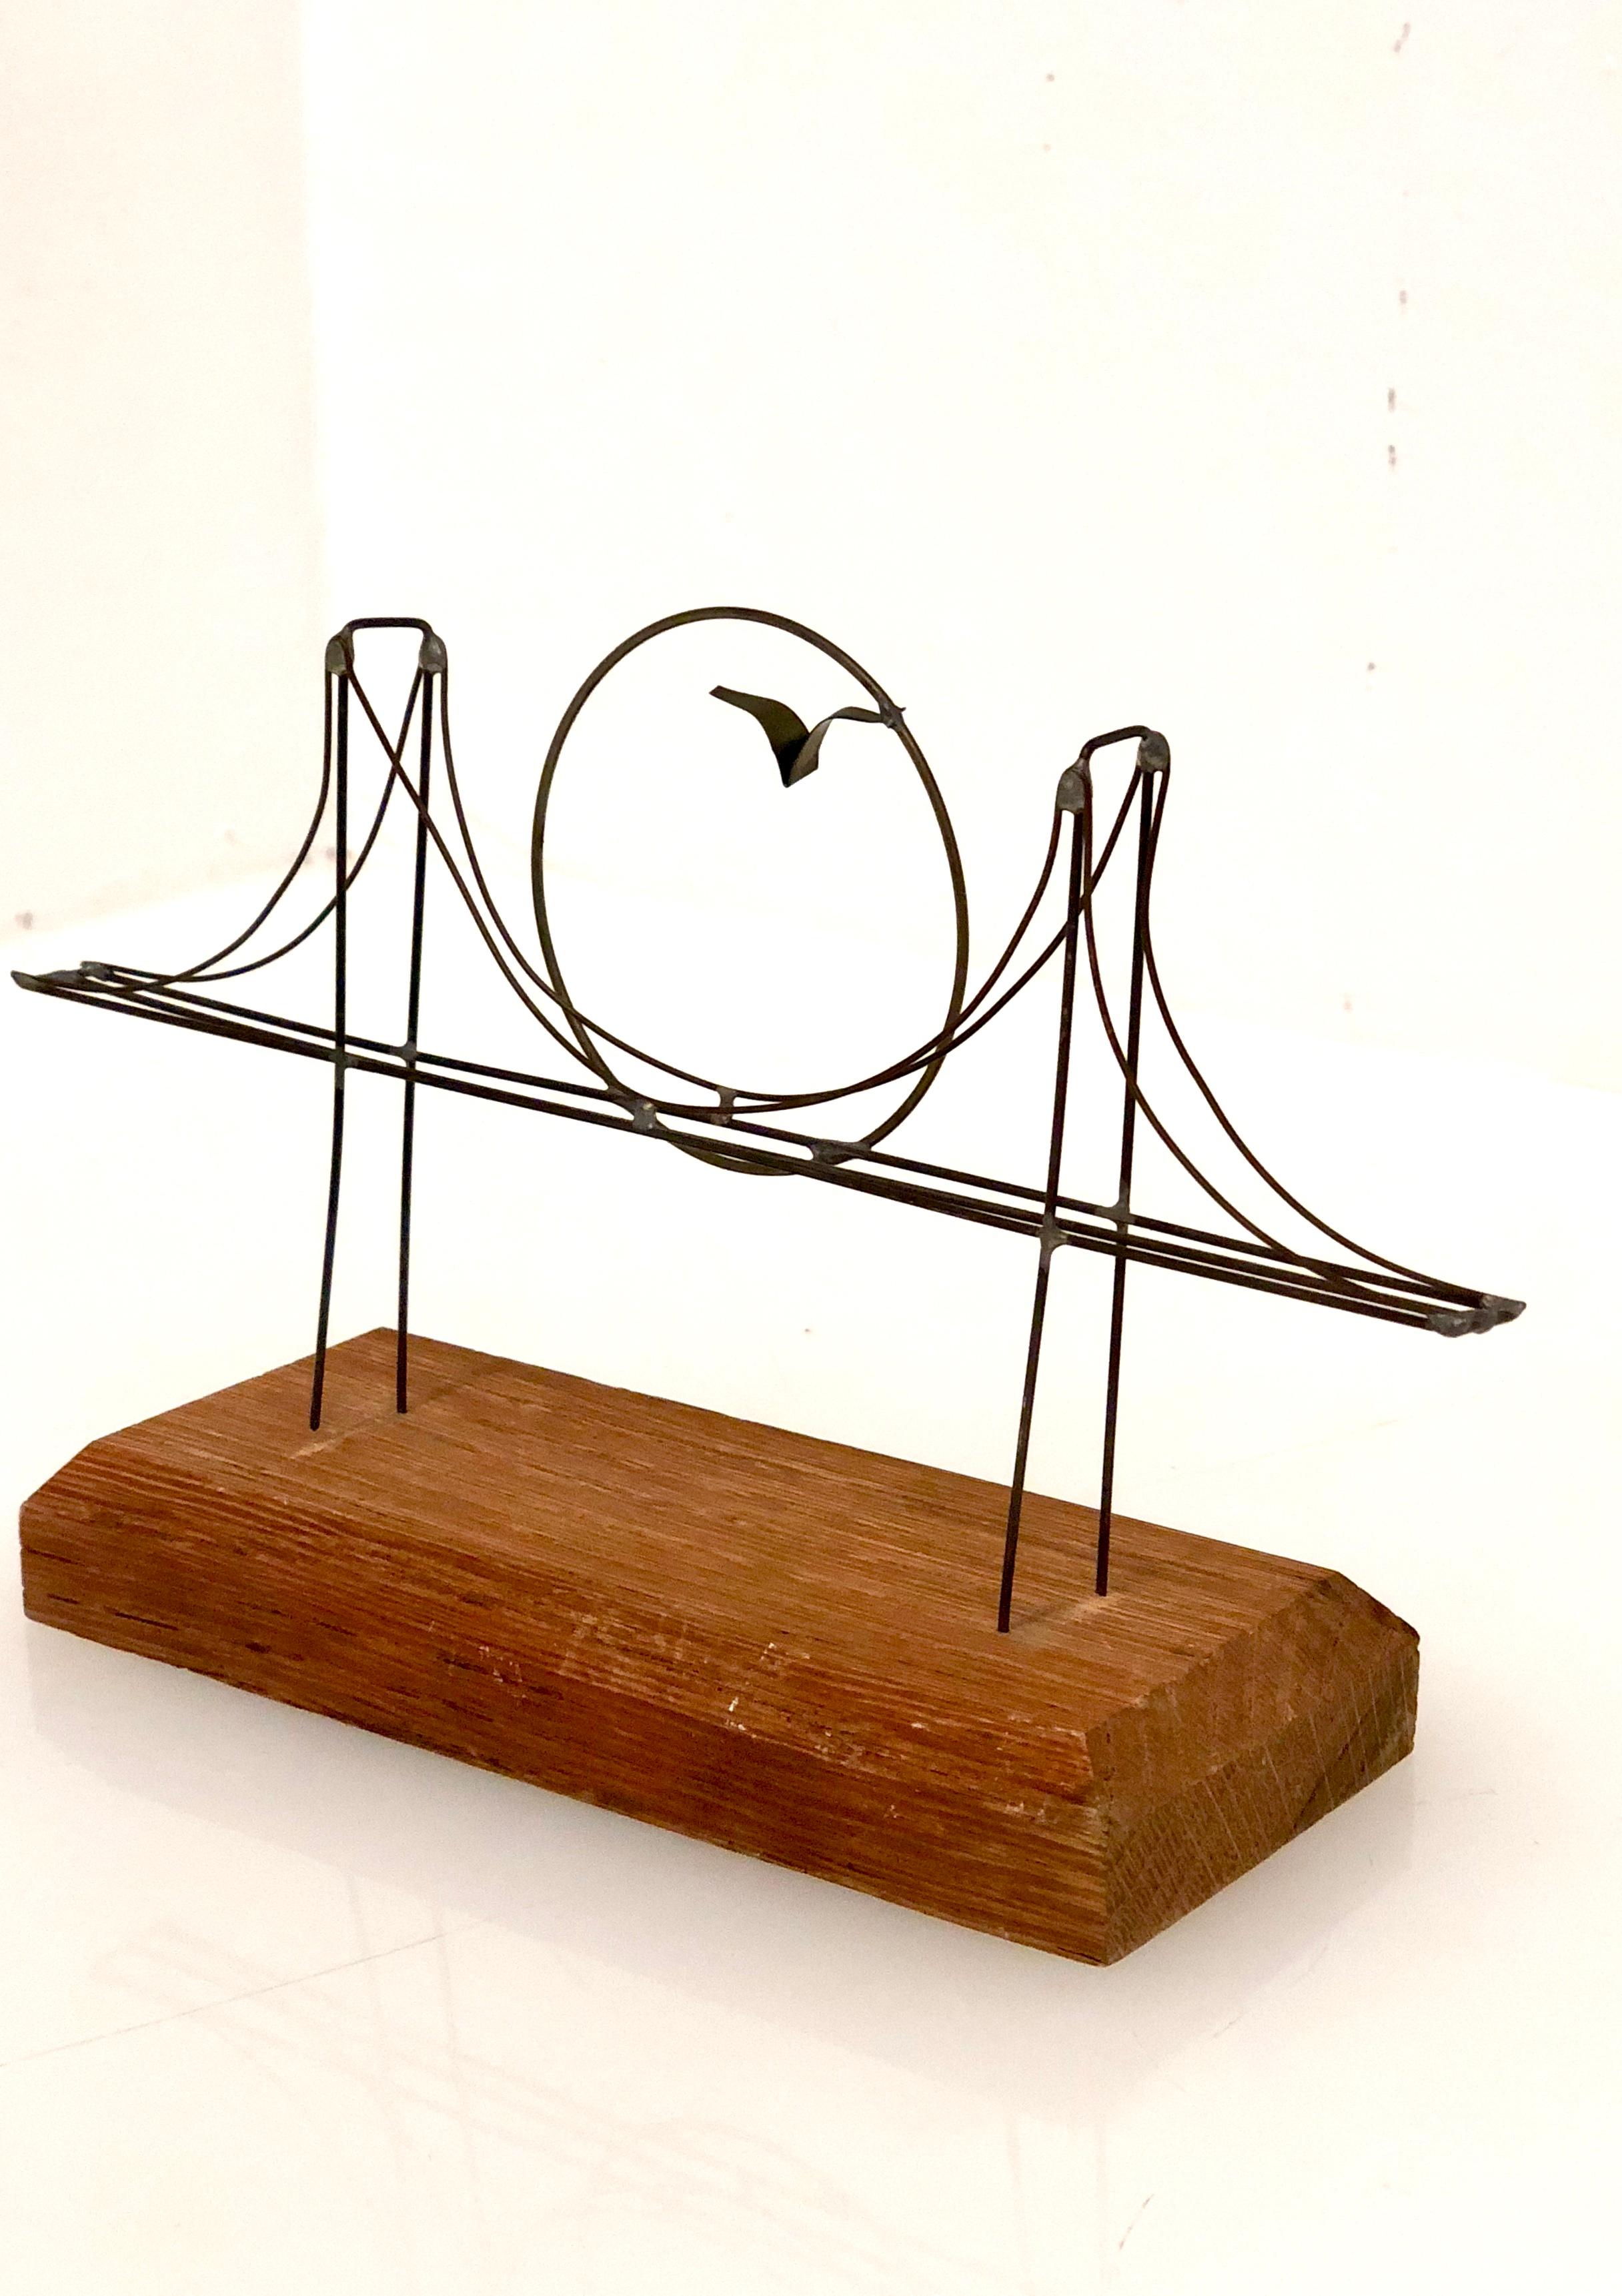 Cool petite wire desk sculpture of the golden gate bridge, San Francisco Bay Area circa 1970's, thin welded wire sitting on a solid mahogany base.